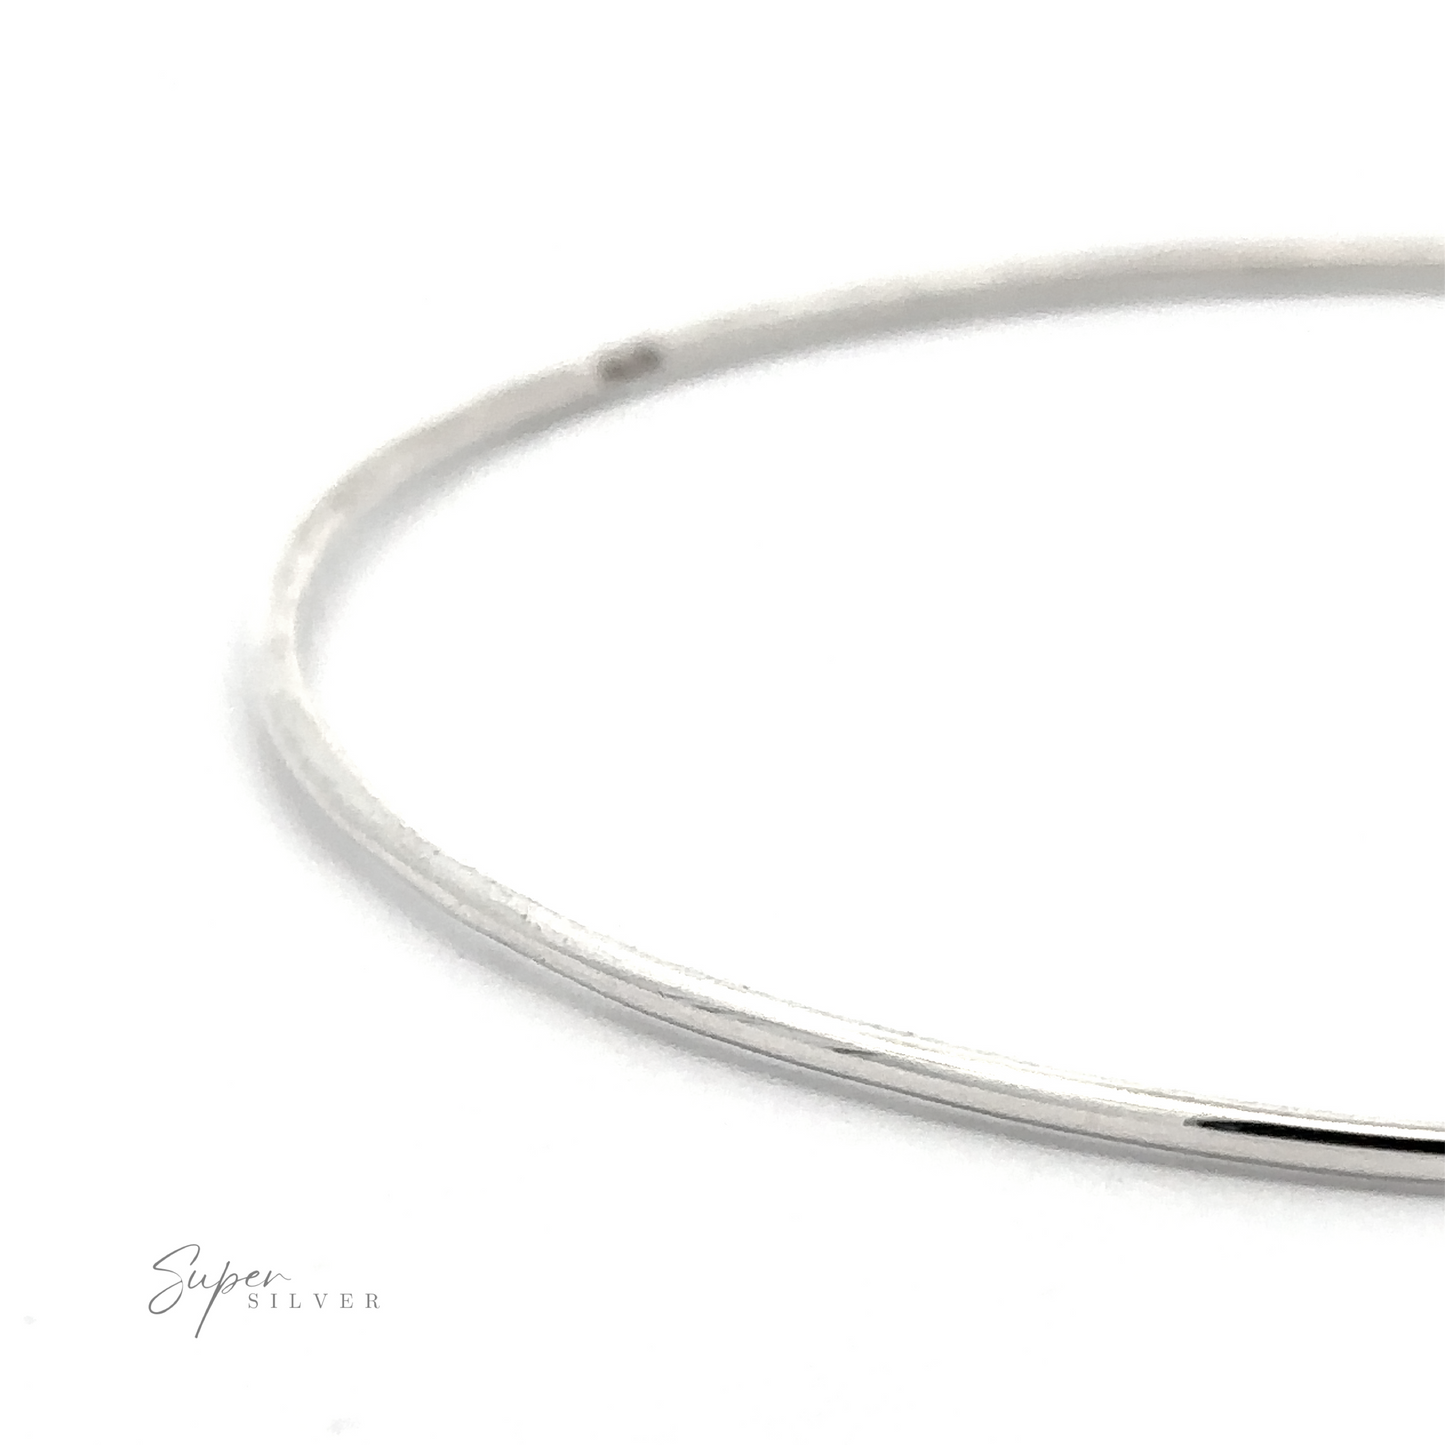 Close-up of a thin, plain silver Plain Bangle set against a pristine white background. "Super Silver" is written in small text in the bottom left corner, highlighting this versatile accessory.